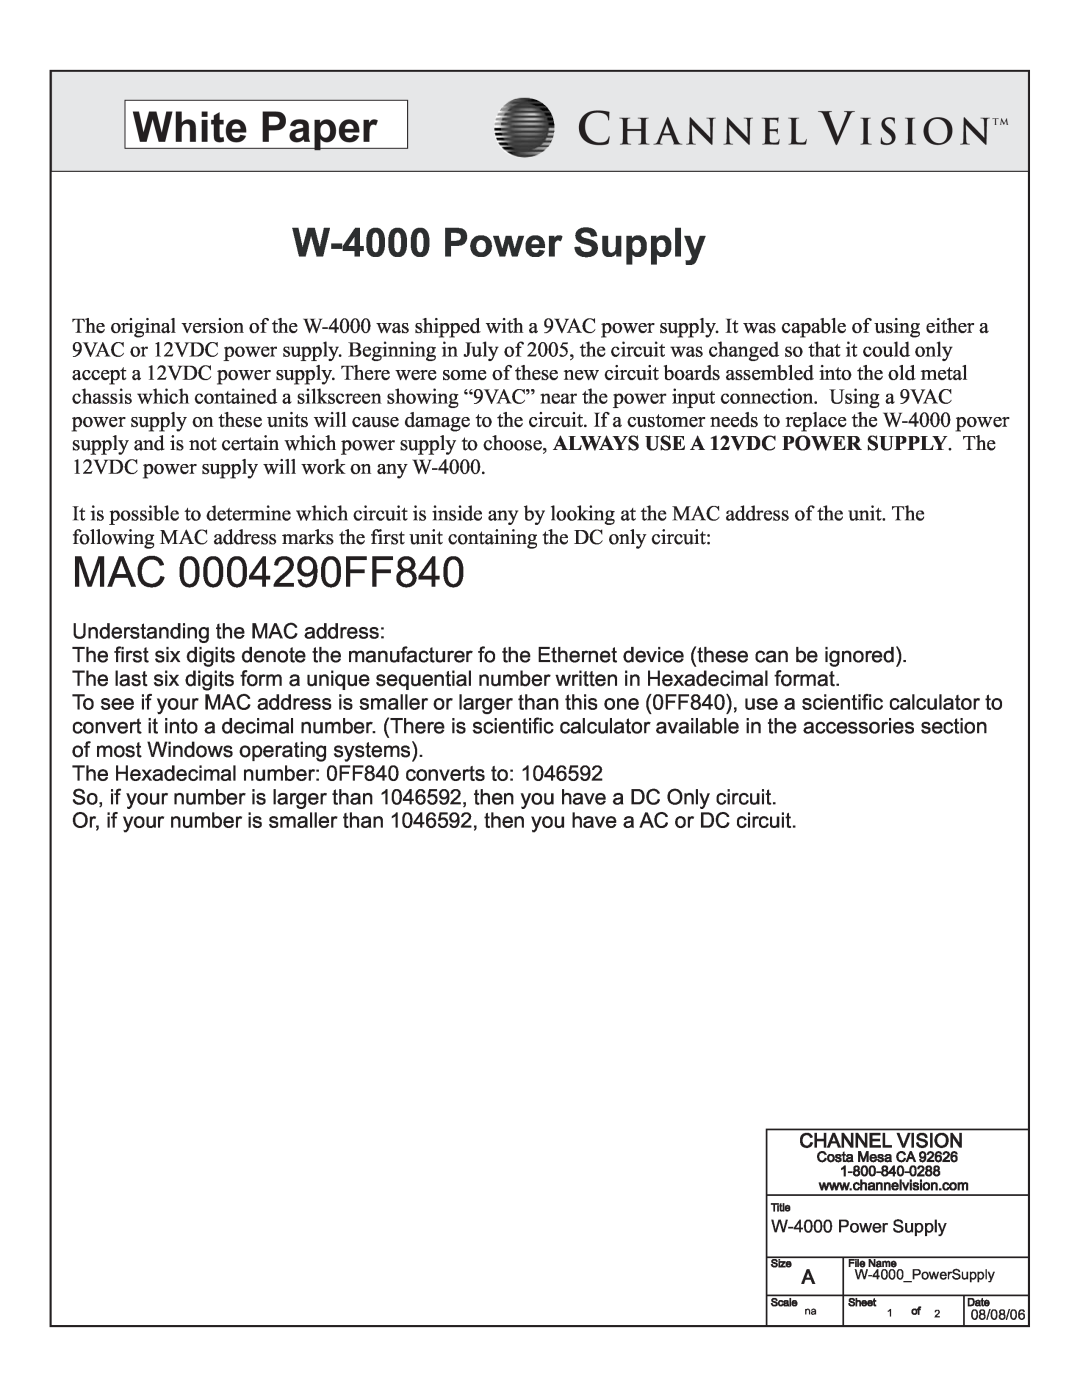 Channel Vision manual White Paper, W-4000 Power Supply, Channel Visiontm, MAC 0004290FF840 